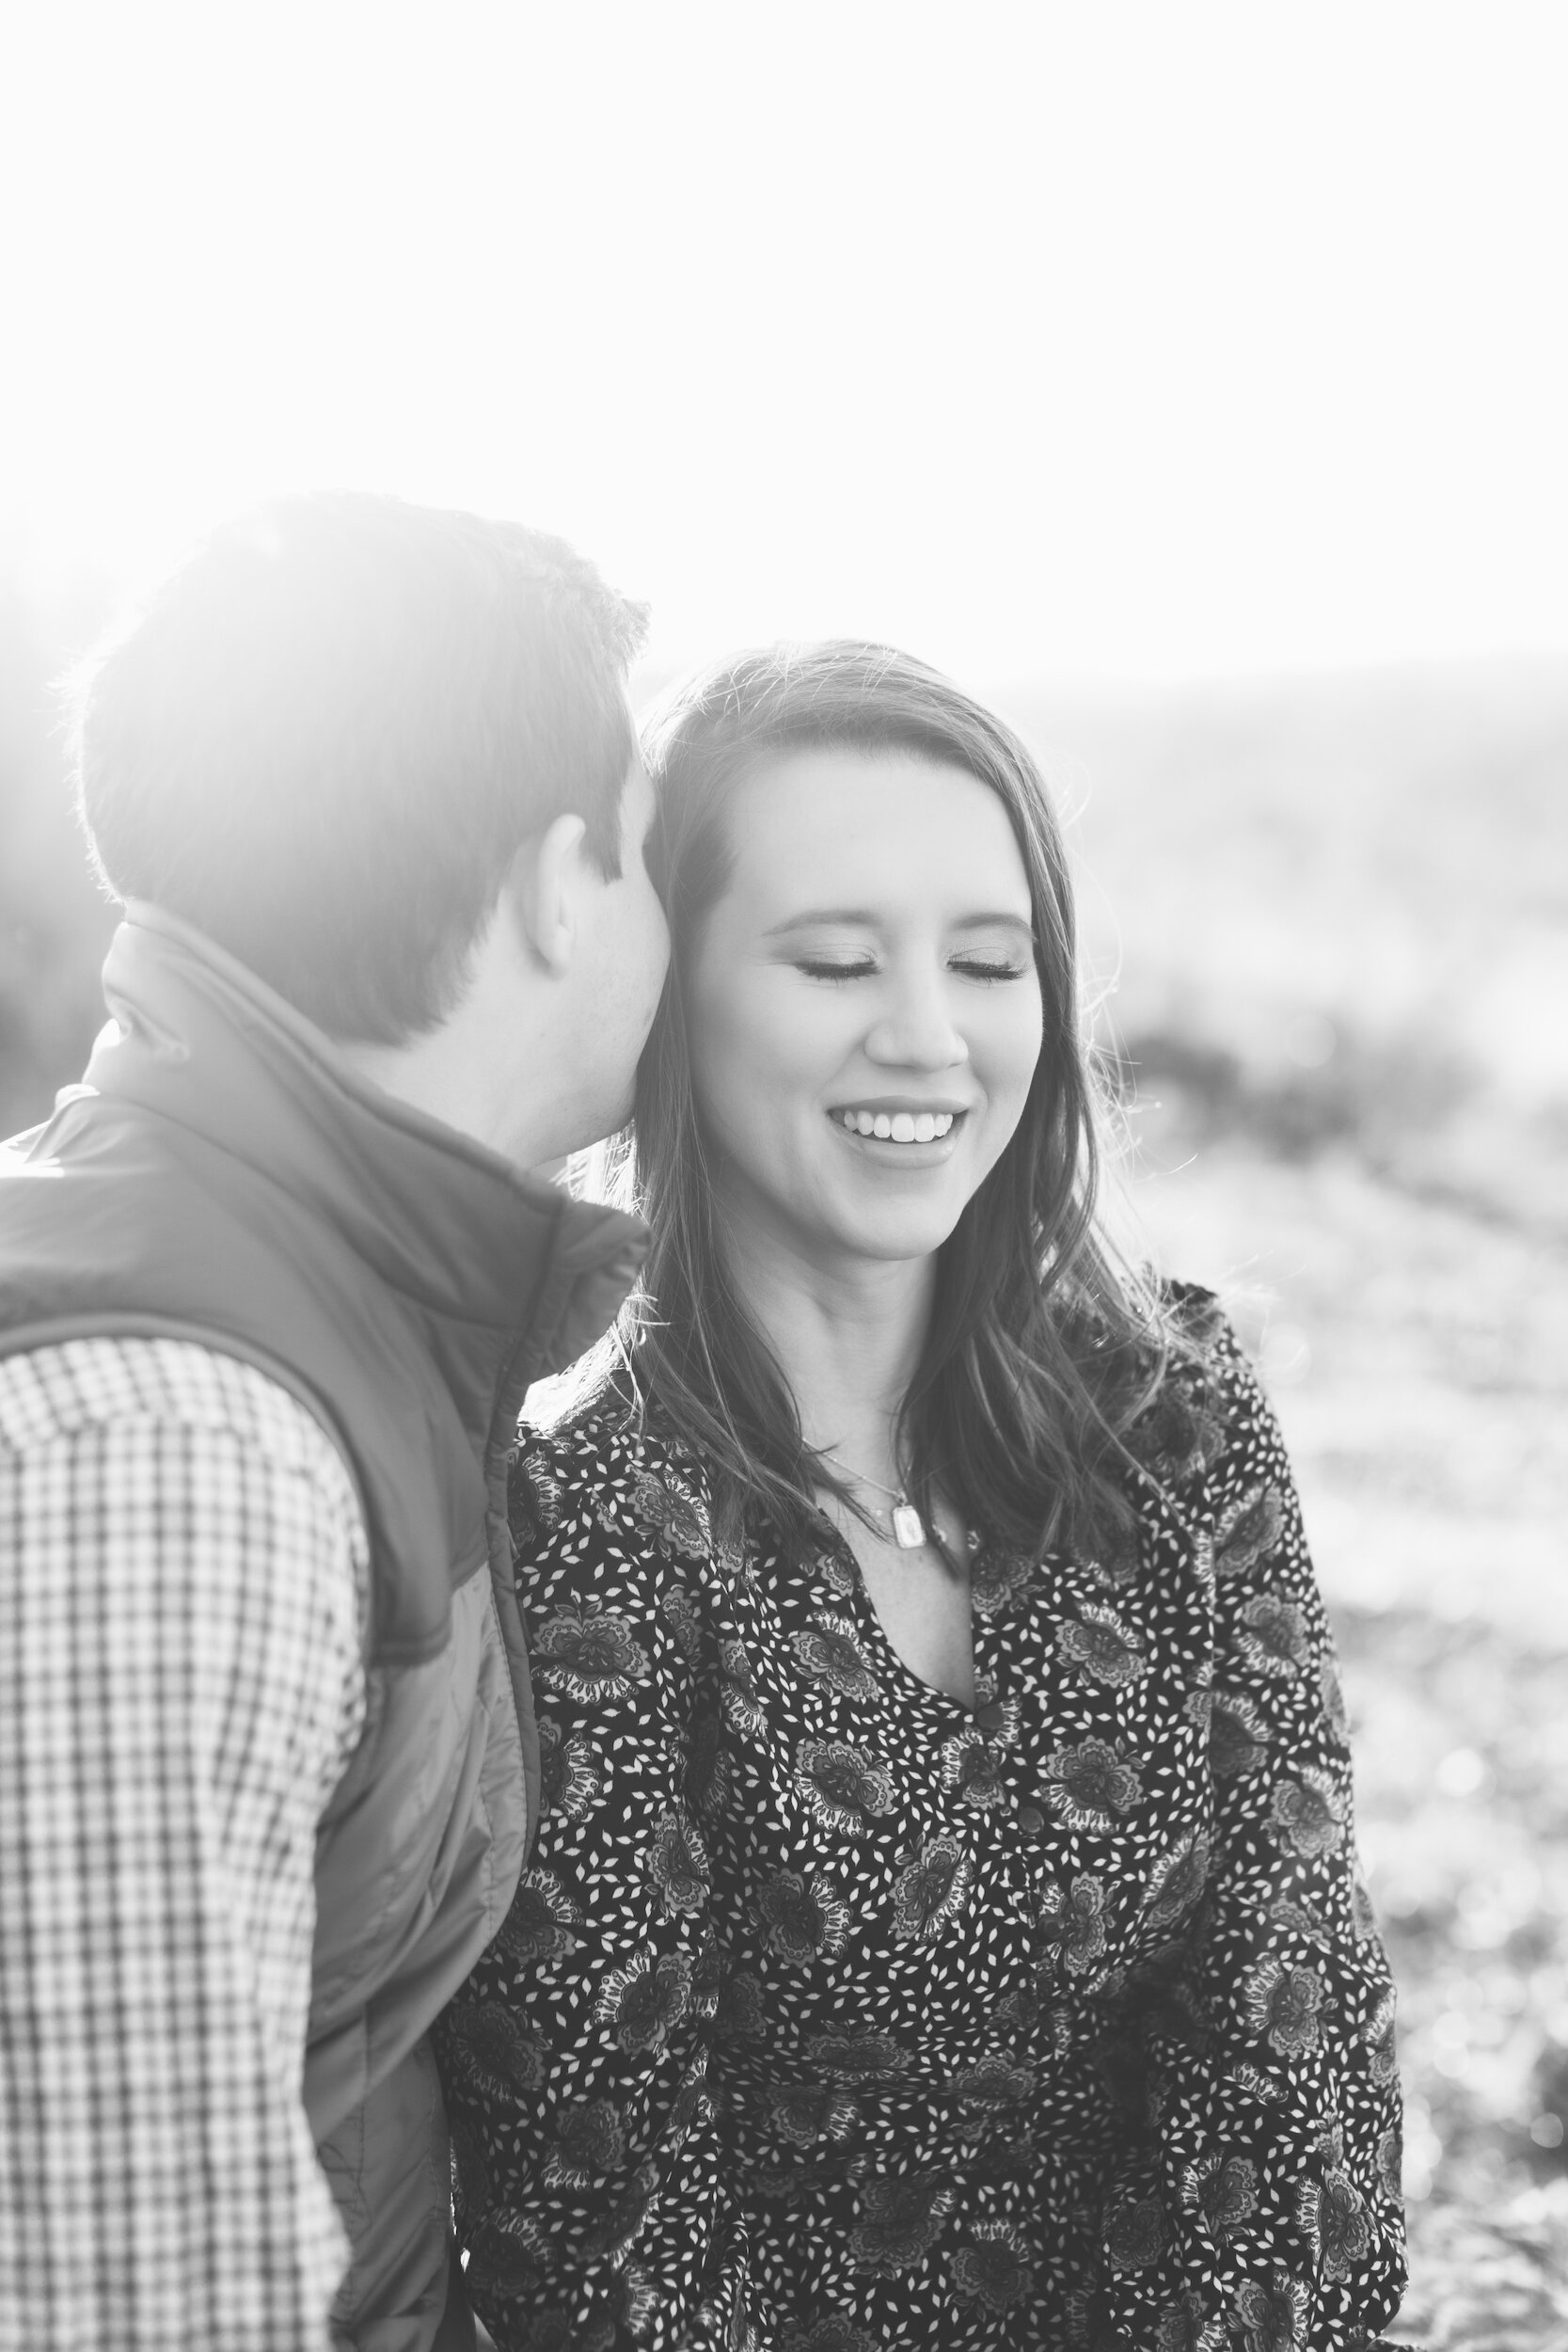 Couple Watching Sunset During Family Farm Winter Engagement Photo Session